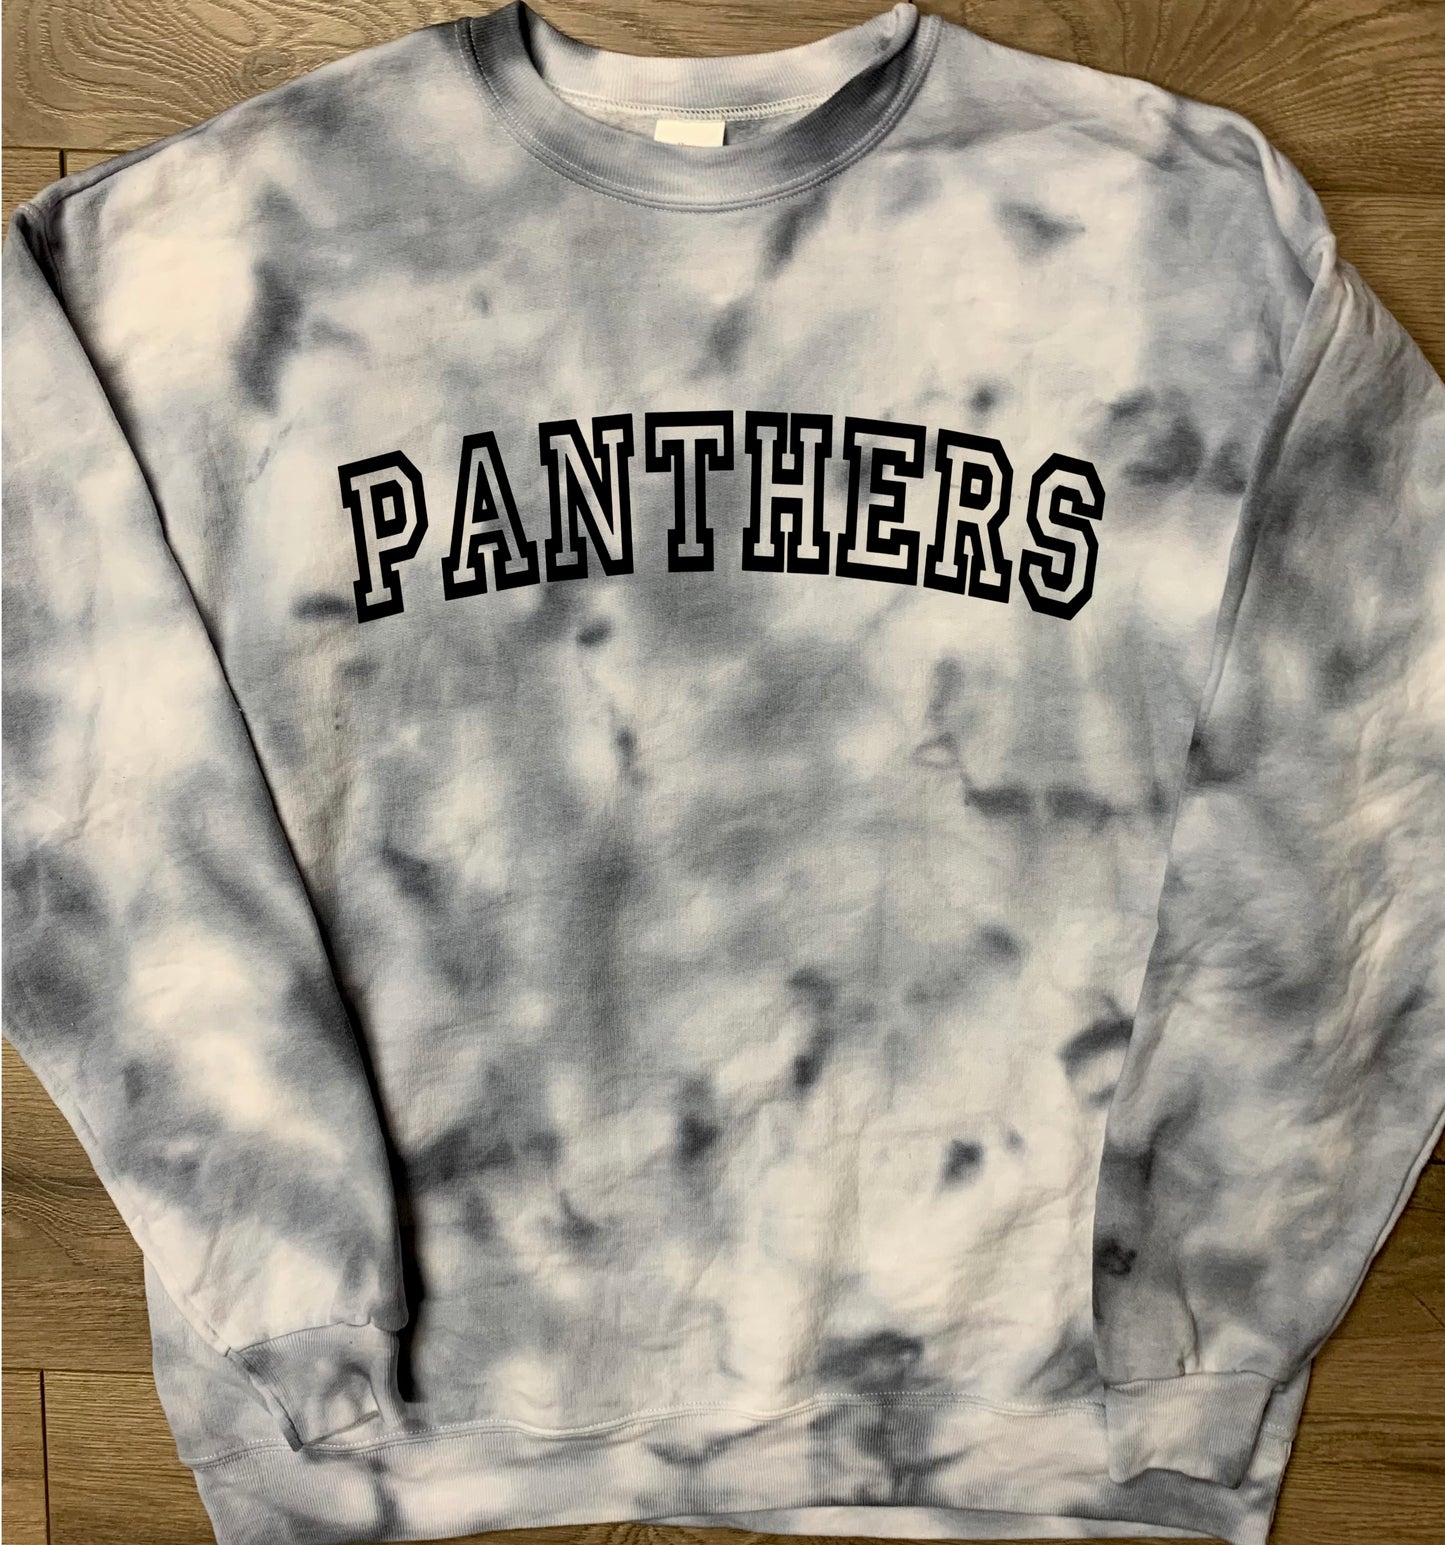 Hand-dyed Adult New Lex Panthers Gray Curved Block Panthers Tie Dye Crewneck Sweatshirt